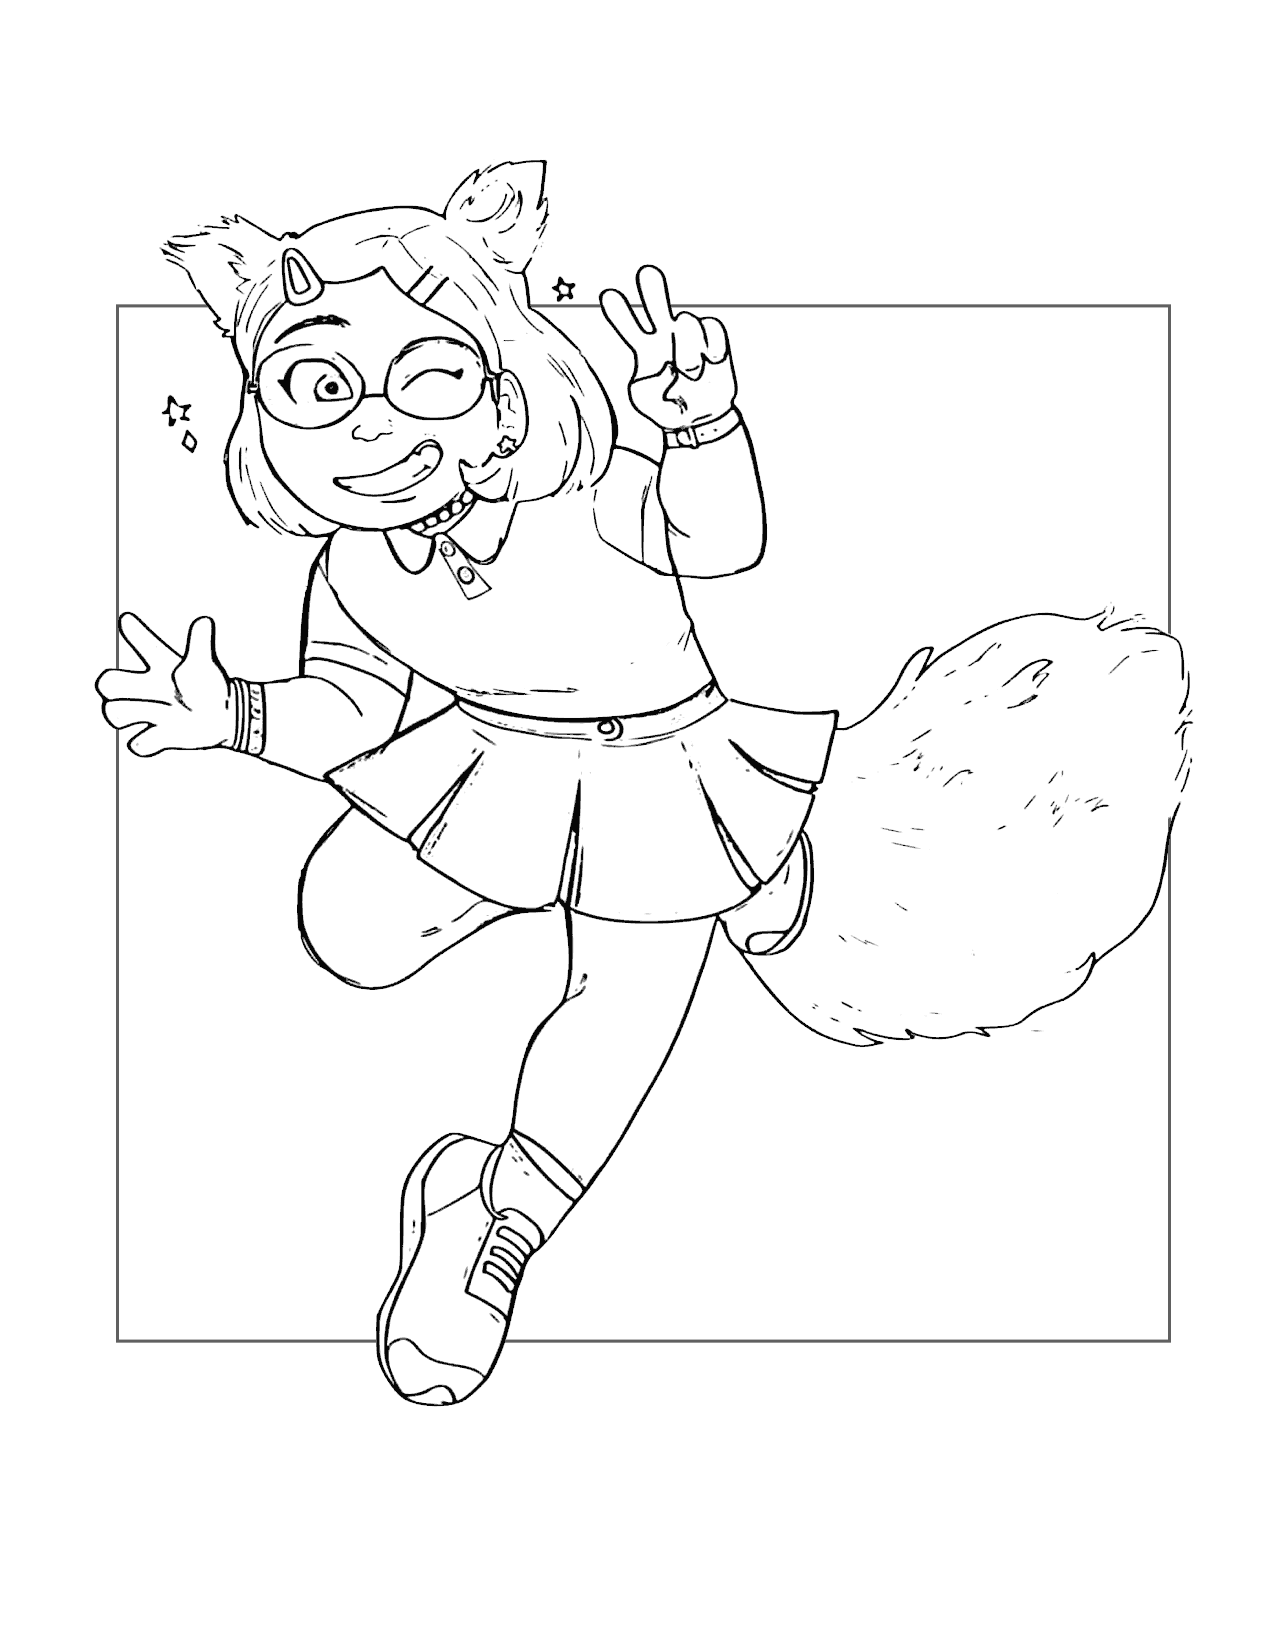 Mei With Panda Tail Coloring Page